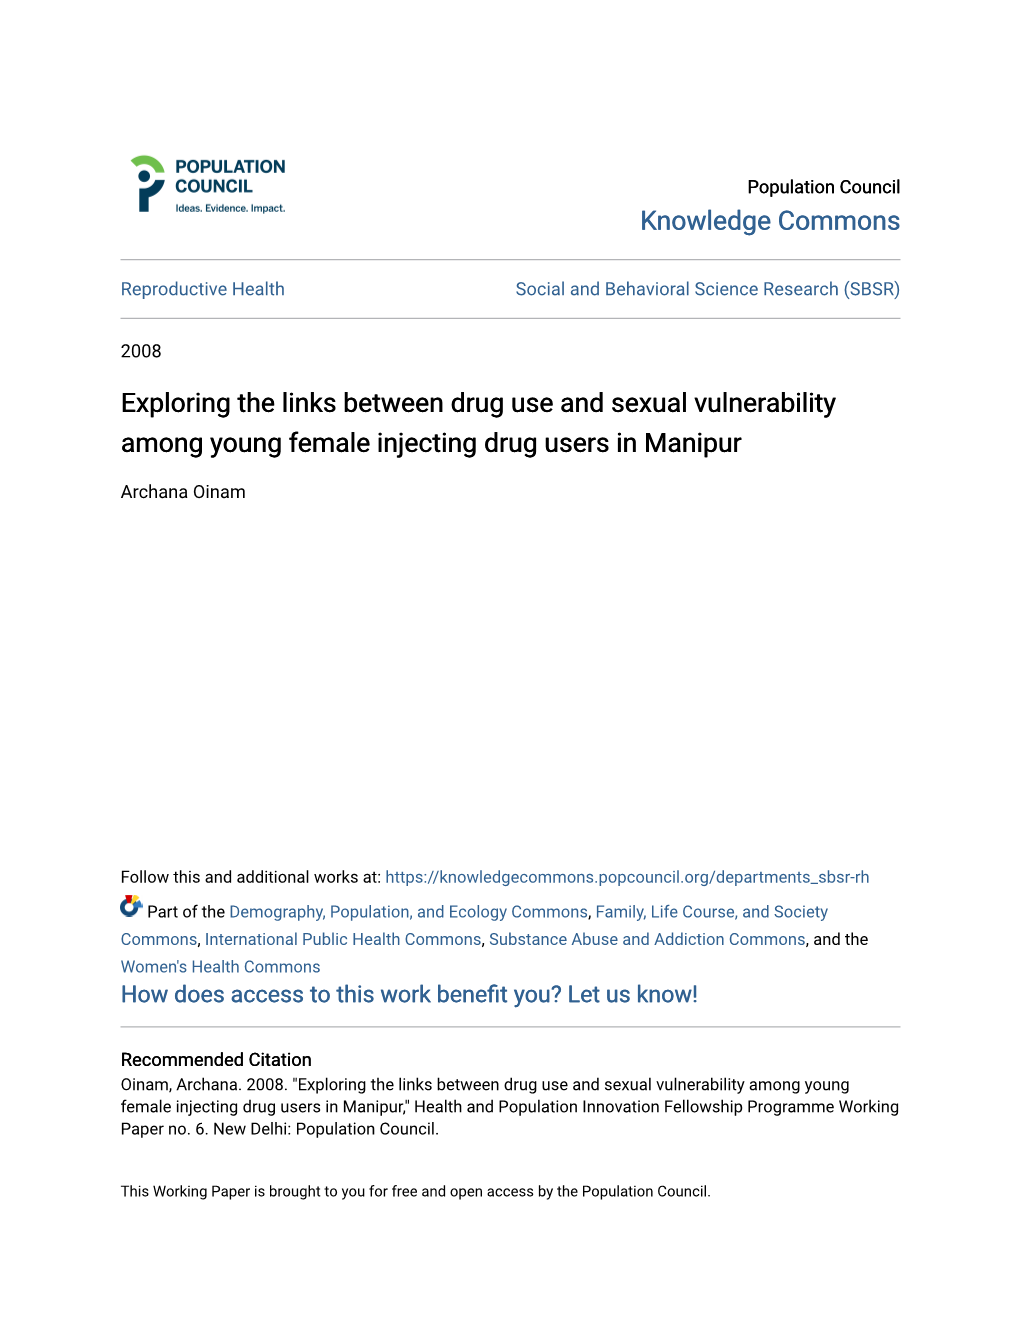 Exploring the Links Between Drug Use and Sexual Vulnerability Among Young Female Injecting Drug Users in Manipur